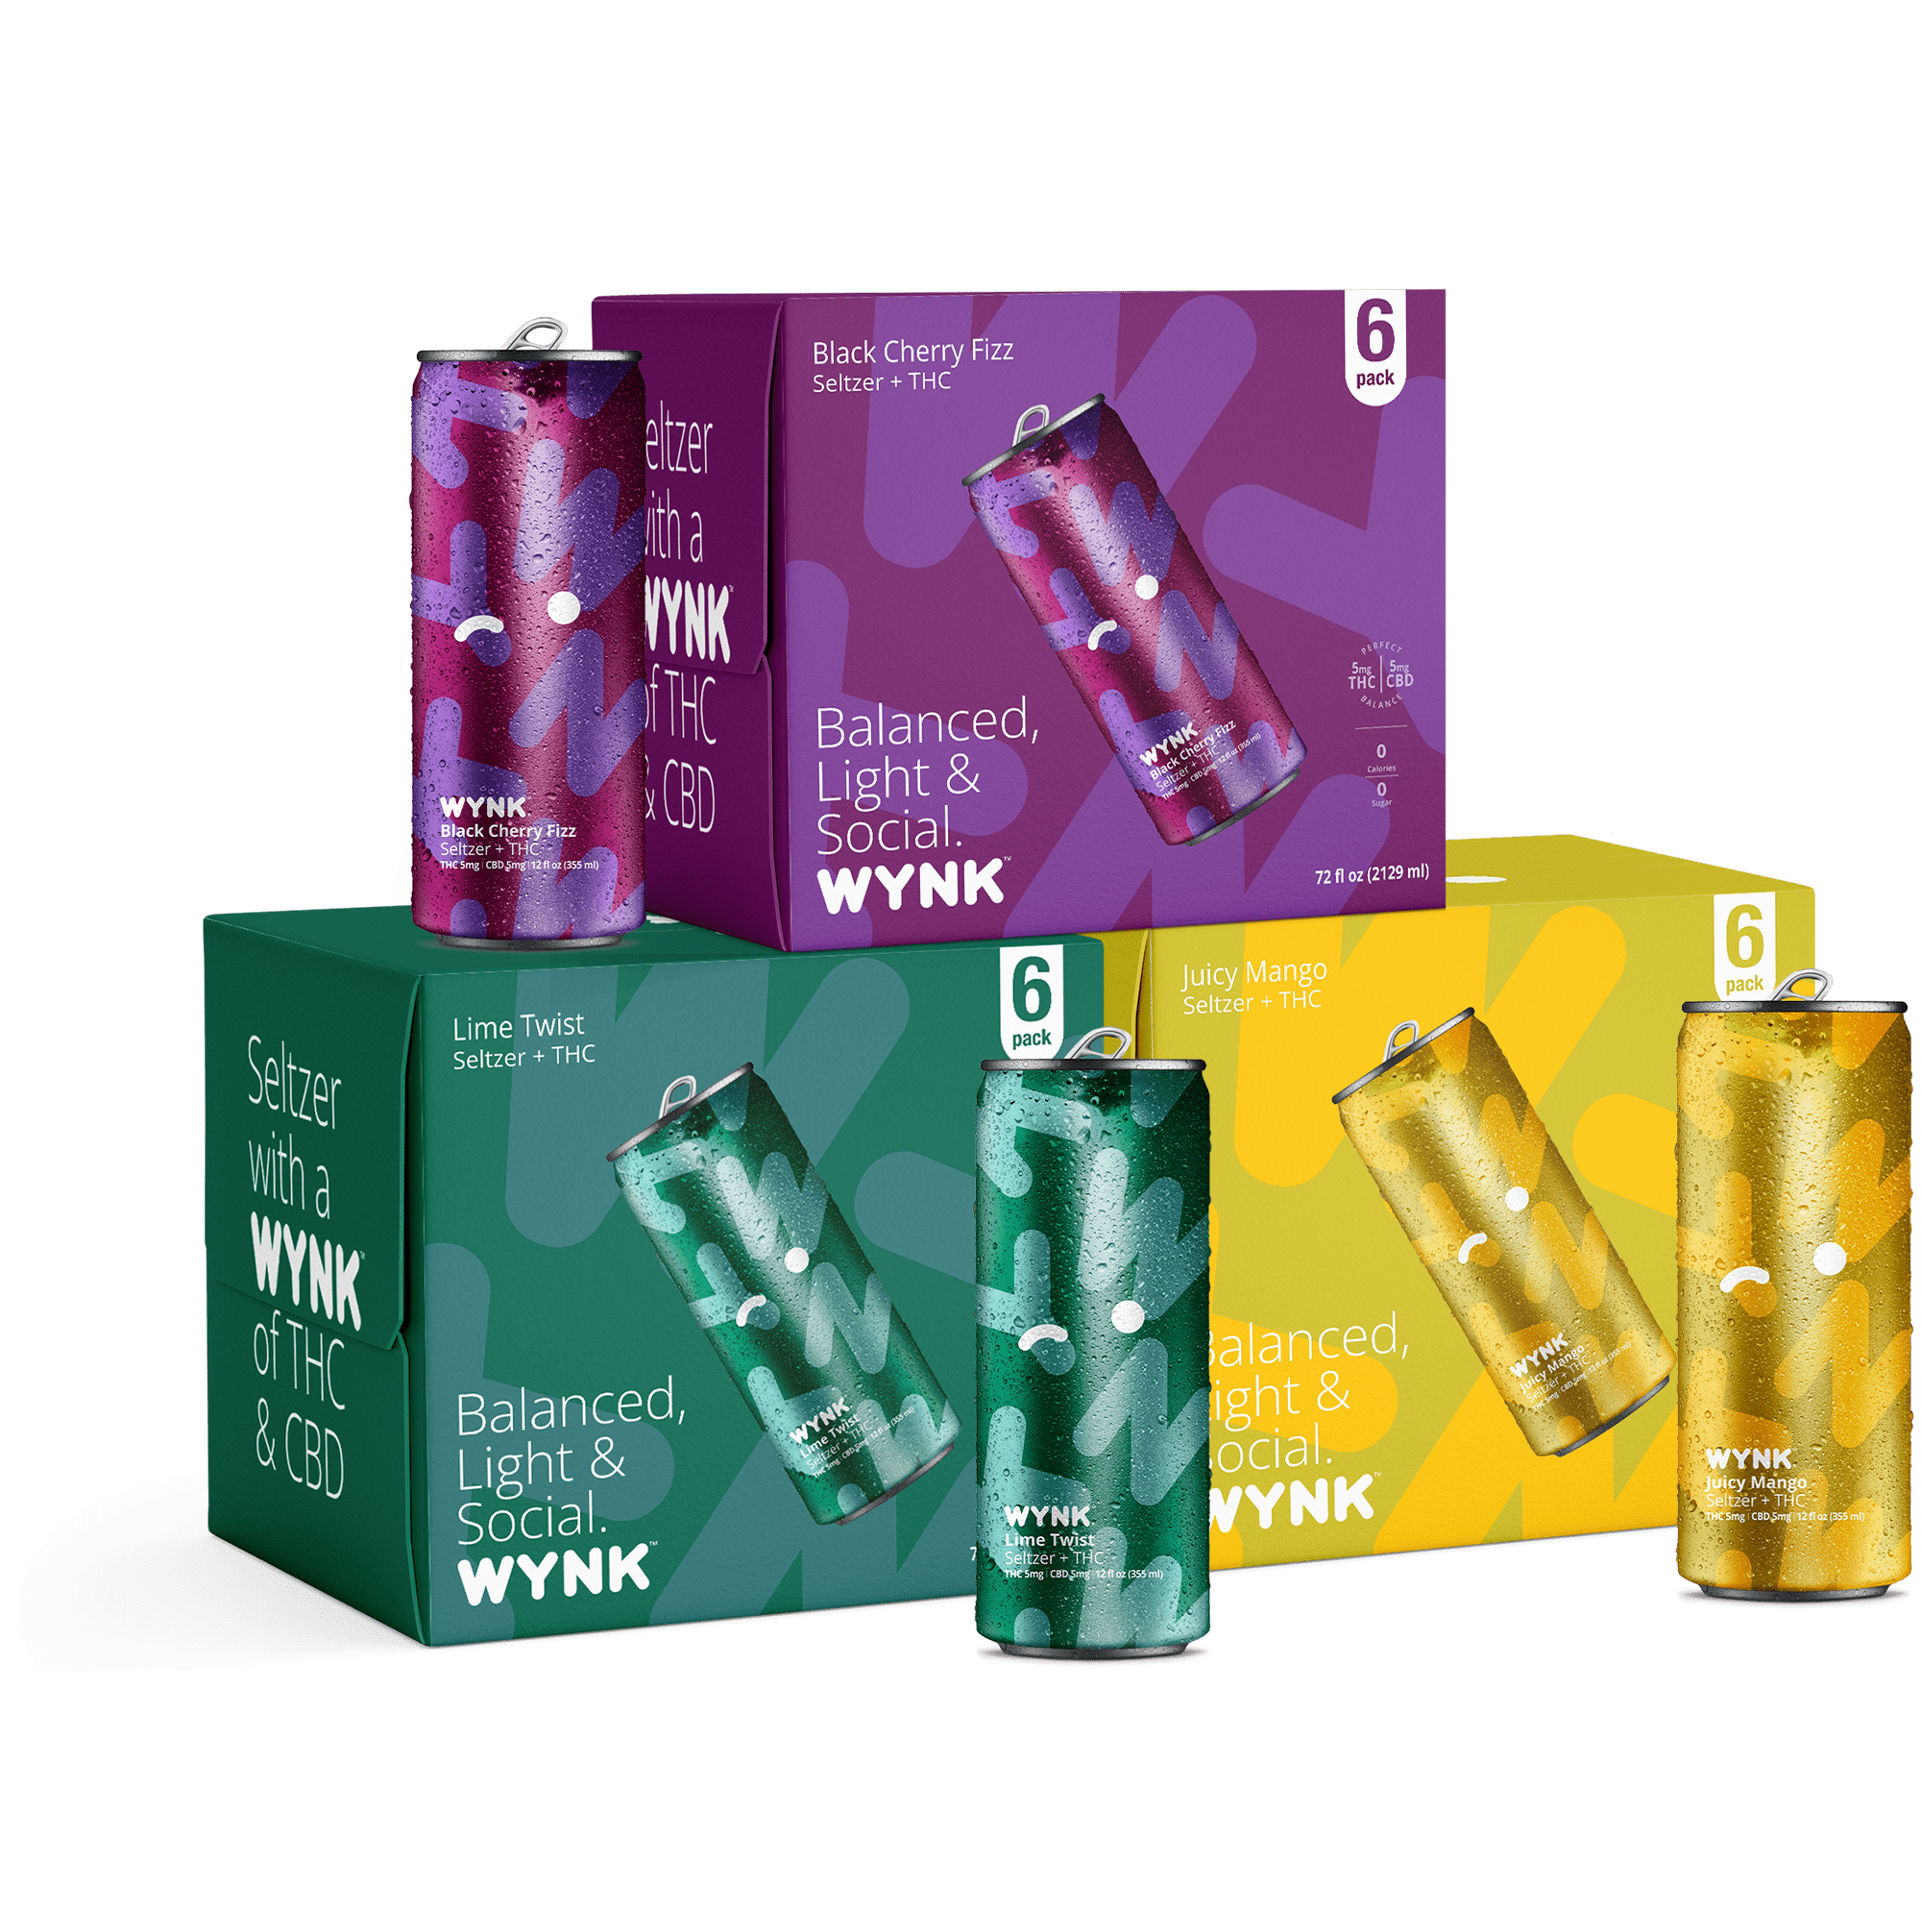 thc beverages online Three six-pack boxes of WYNK THC Drinks, each presenting a different flavor – Black Cherry Fizz, Lime Twist, and Juicy Mango, with the cans displayed in front. Promoted as the best alcohol alternative, these beverages offer a low dose THC and CBD option for a balanced, light, and social experience.